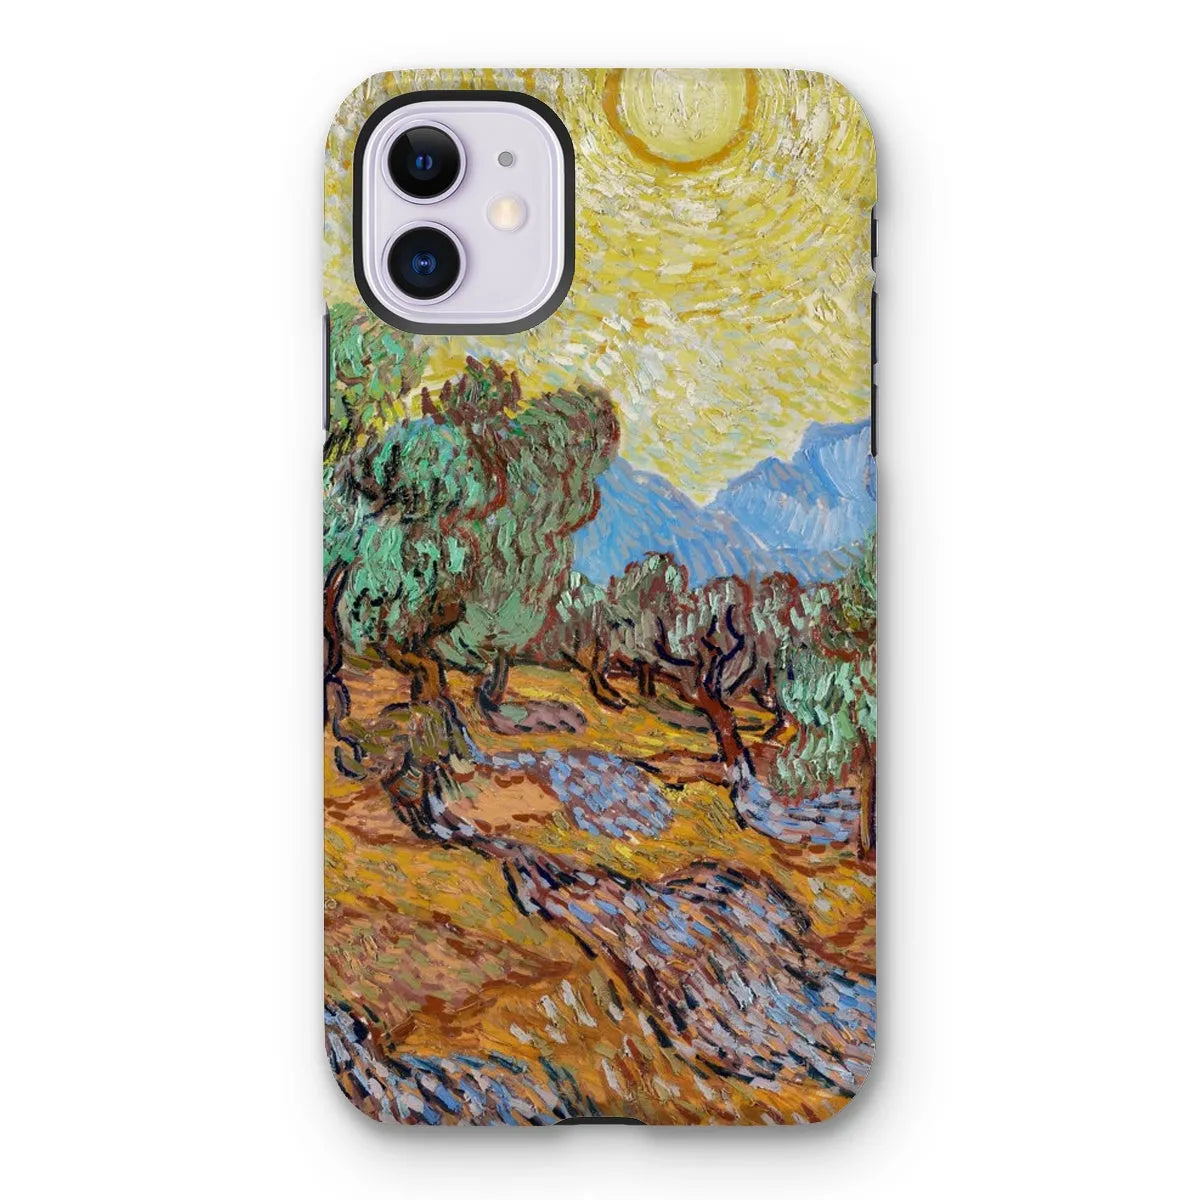 Olive Trees Too - Impressionist Phone Case - Vincent Van Gogh - Iphone 11 / Matte - Mobile Phone Cases - Aesthetic Art